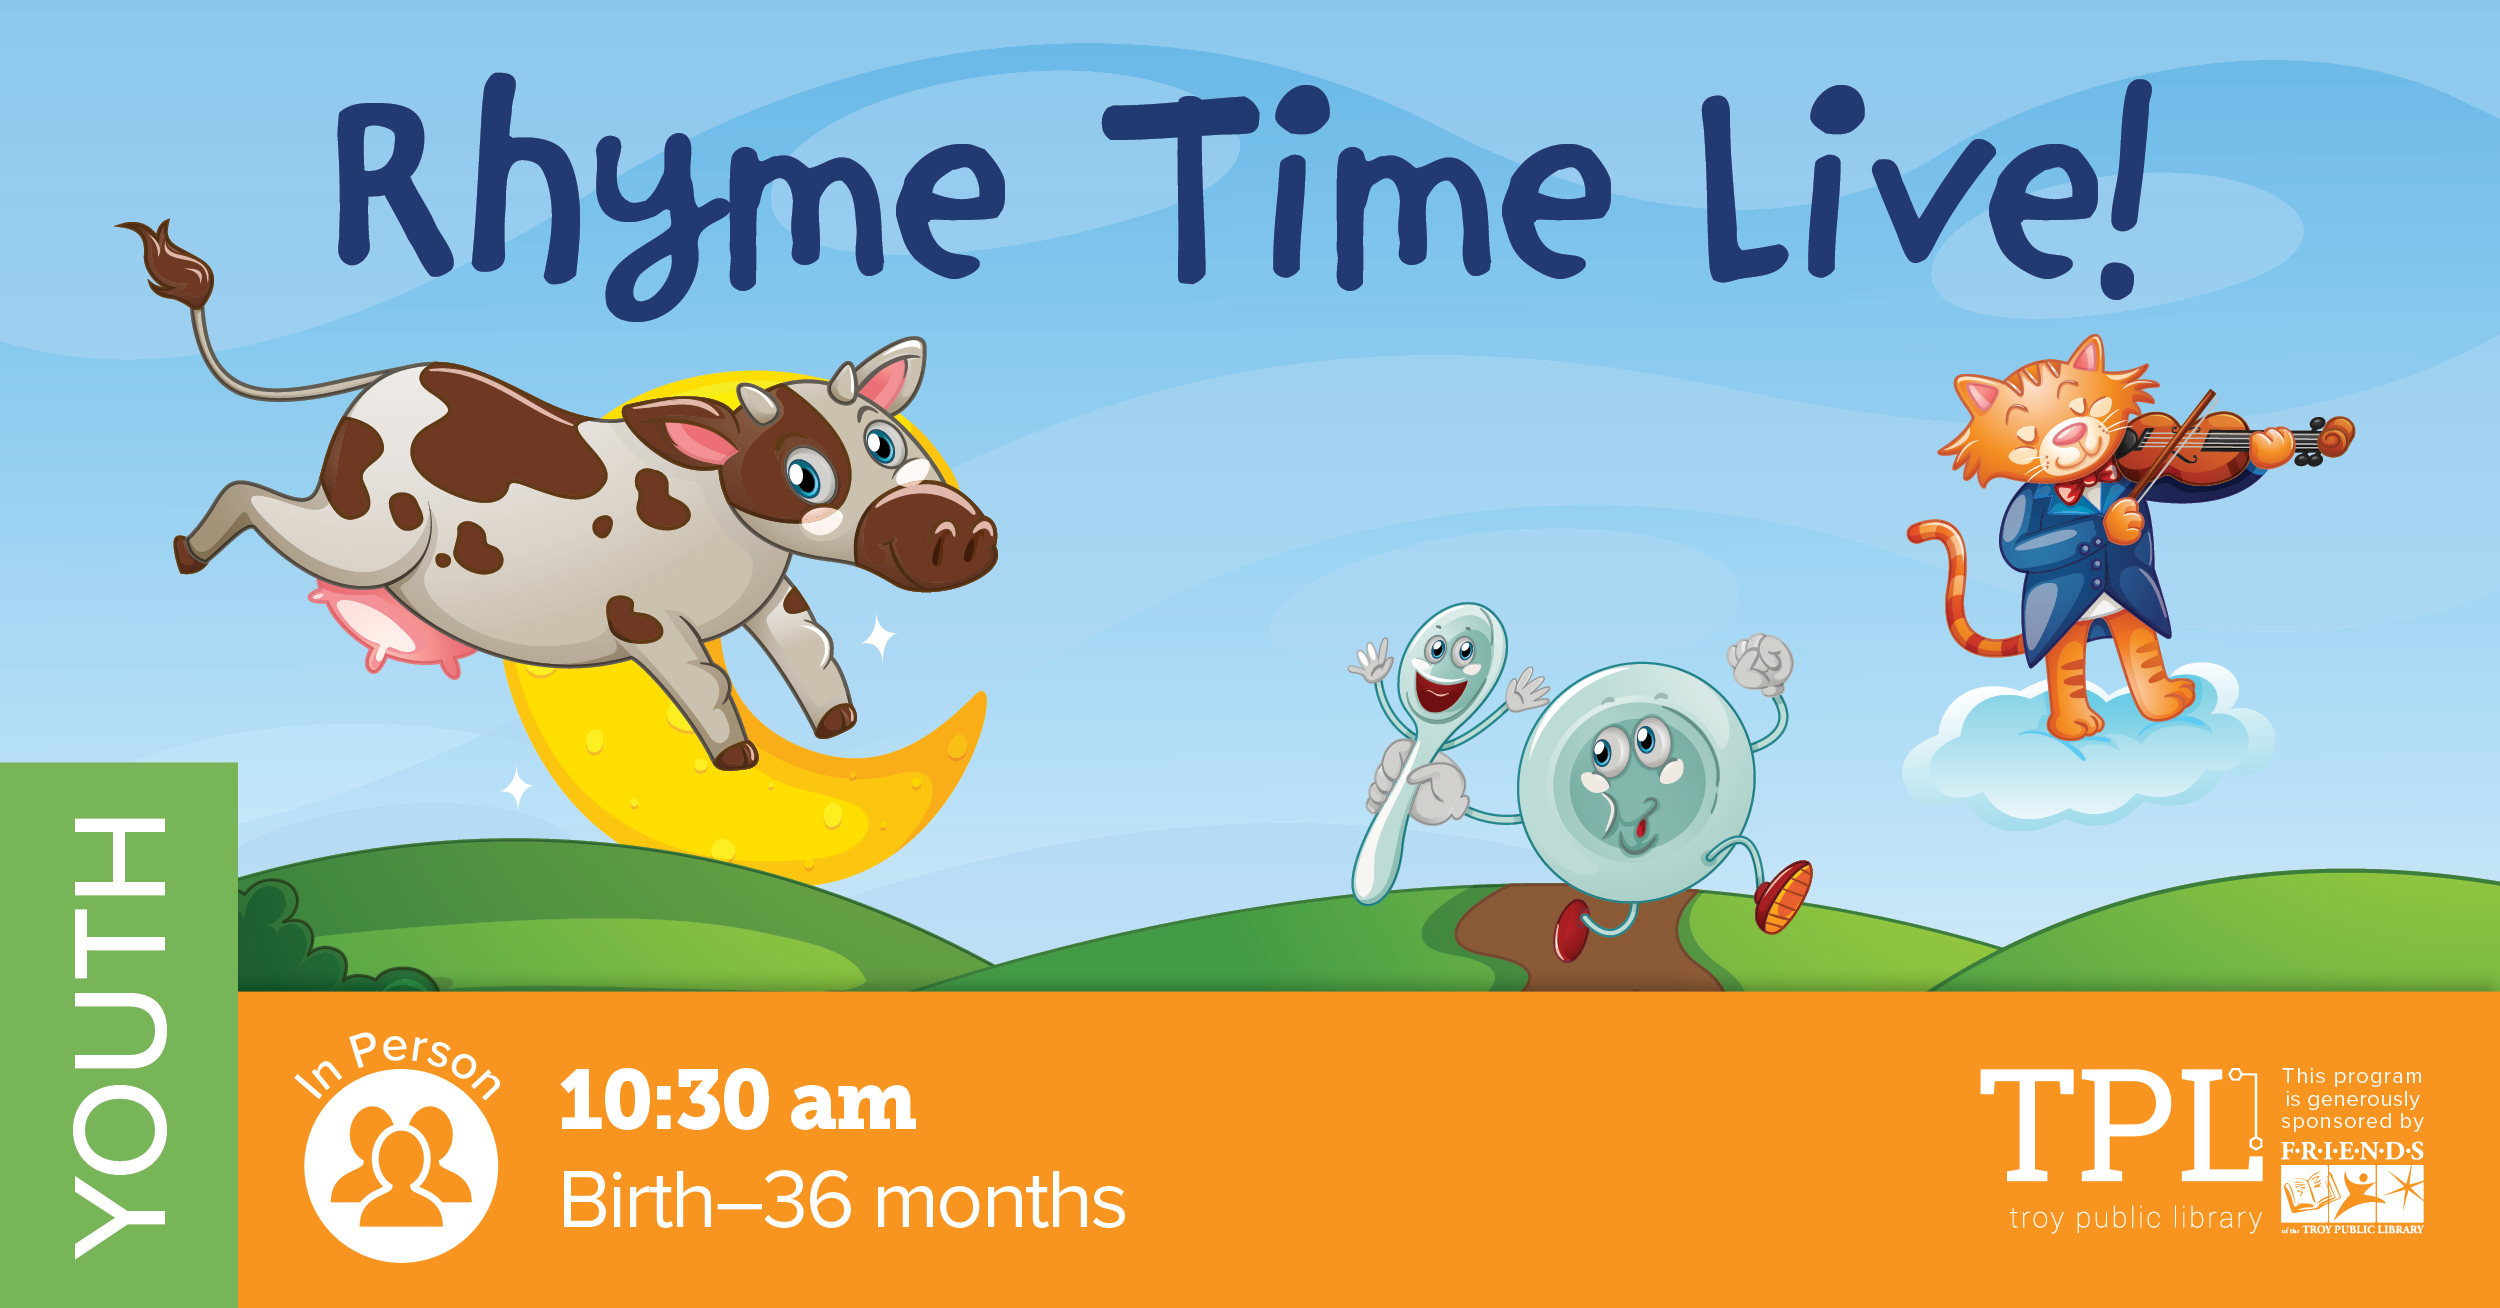 Rhyme Time Live!  Wednesdays at 10:30 a.m.